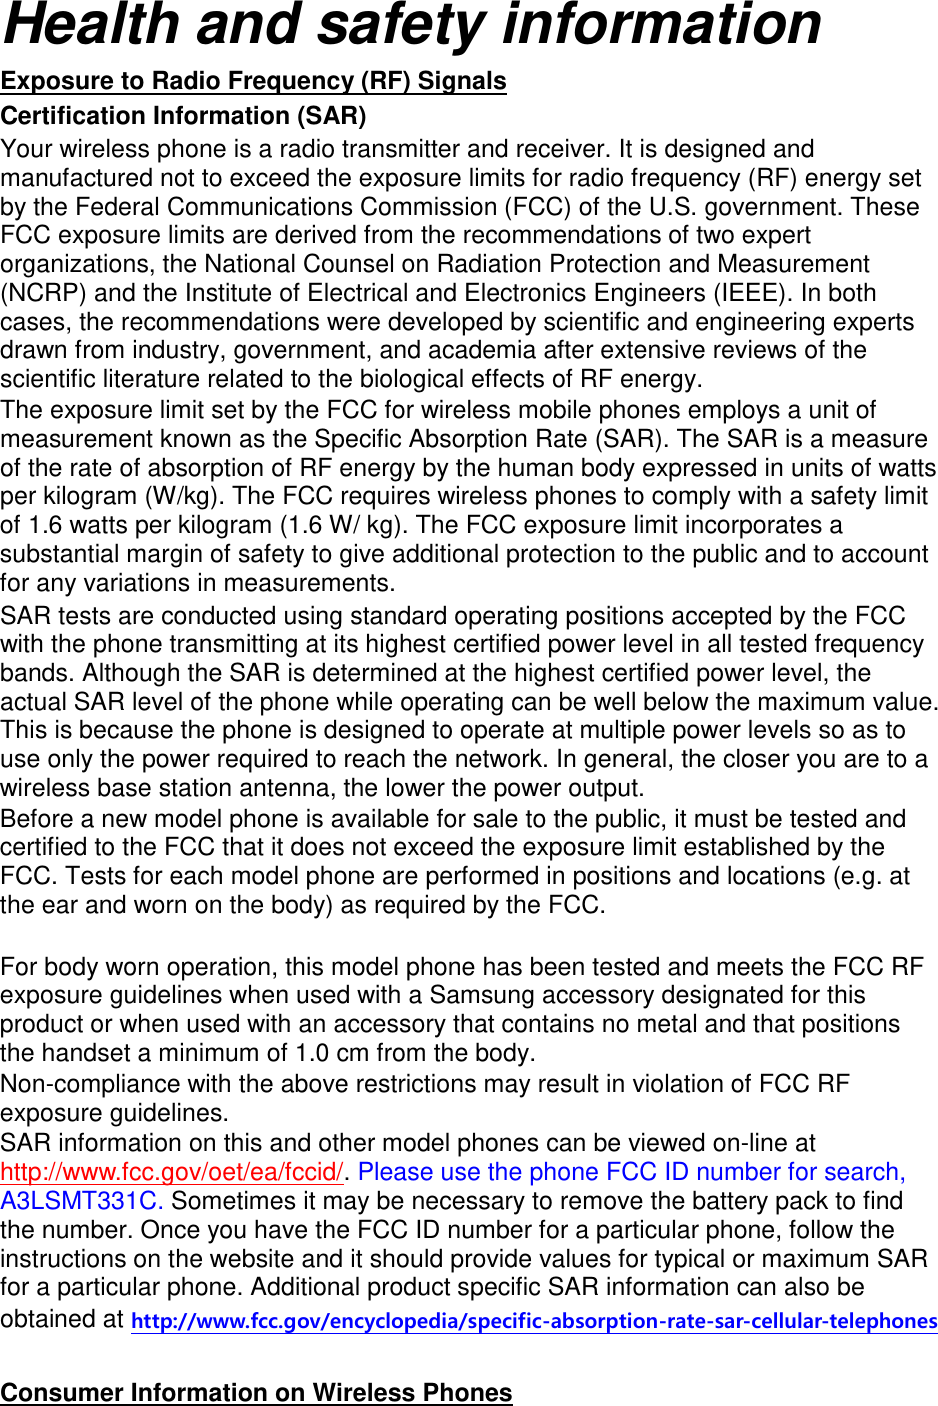 Health and safety information Exposure to Radio Frequency (RF) Signals Certification Information (SAR) Your wireless phone is a radio transmitter and receiver. It is designed and manufactured not to exceed the exposure limits for radio frequency (RF) energy set by the Federal Communications Commission (FCC) of the U.S. government. These FCC exposure limits are derived from the recommendations of two expert organizations, the National Counsel on Radiation Protection and Measurement (NCRP) and the Institute of Electrical and Electronics Engineers (IEEE). In both cases, the recommendations were developed by scientific and engineering experts drawn from industry, government, and academia after extensive reviews of the scientific literature related to the biological effects of RF energy. The exposure limit set by the FCC for wireless mobile phones employs a unit of measurement known as the Specific Absorption Rate (SAR). The SAR is a measure of the rate of absorption of RF energy by the human body expressed in units of watts per kilogram (W/kg). The FCC requires wireless phones to comply with a safety limit of 1.6 watts per kilogram (1.6 W/ kg). The FCC exposure limit incorporates a substantial margin of safety to give additional protection to the public and to account for any variations in measurements. SAR tests are conducted using standard operating positions accepted by the FCC with the phone transmitting at its highest certified power level in all tested frequency bands. Although the SAR is determined at the highest certified power level, the actual SAR level of the phone while operating can be well below the maximum value. This is because the phone is designed to operate at multiple power levels so as to use only the power required to reach the network. In general, the closer you are to a wireless base station antenna, the lower the power output. Before a new model phone is available for sale to the public, it must be tested and certified to the FCC that it does not exceed the exposure limit established by the FCC. Tests for each model phone are performed in positions and locations (e.g. at the ear and worn on the body) as required by the FCC.      For body worn operation, this model phone has been tested and meets the FCC RF exposure guidelines when used with a Samsung accessory designated for this product or when used with an accessory that contains no metal and that positions the handset a minimum of 1.0 cm from the body.   Non-compliance with the above restrictions may result in violation of FCC RF exposure guidelines. SAR information on this and other model phones can be viewed on-line at http://www.fcc.gov/oet/ea/fccid/. Please use the phone FCC ID number for search, A3LSMT331C. Sometimes it may be necessary to remove the battery pack to find the number. Once you have the FCC ID number for a particular phone, follow the instructions on the website and it should provide values for typical or maximum SAR for a particular phone. Additional product specific SAR information can also be obtained at http://www.fcc.gov/encyclopedia/specific-absorption-rate-sar-cellular-telephones  Consumer Information on Wireless Phones 